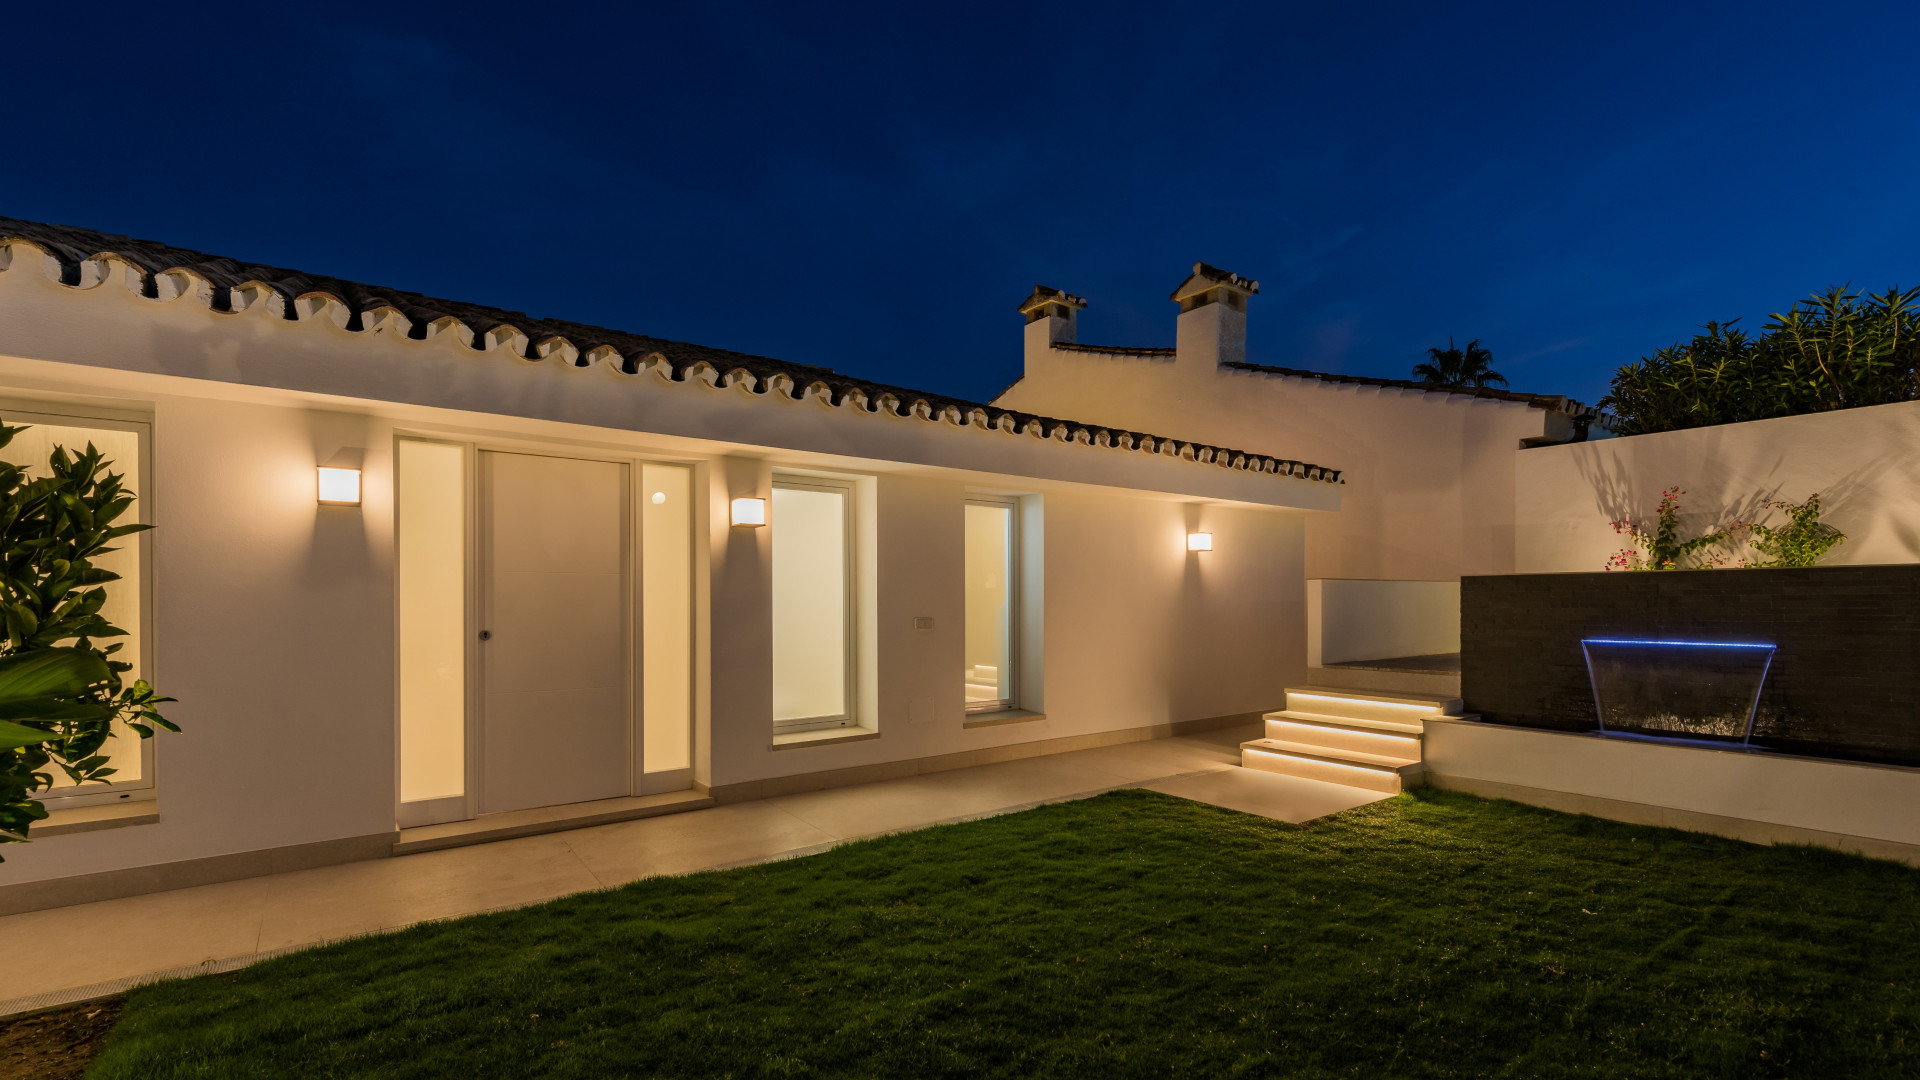 Fully renovated frontline beach villa located west of Estepona